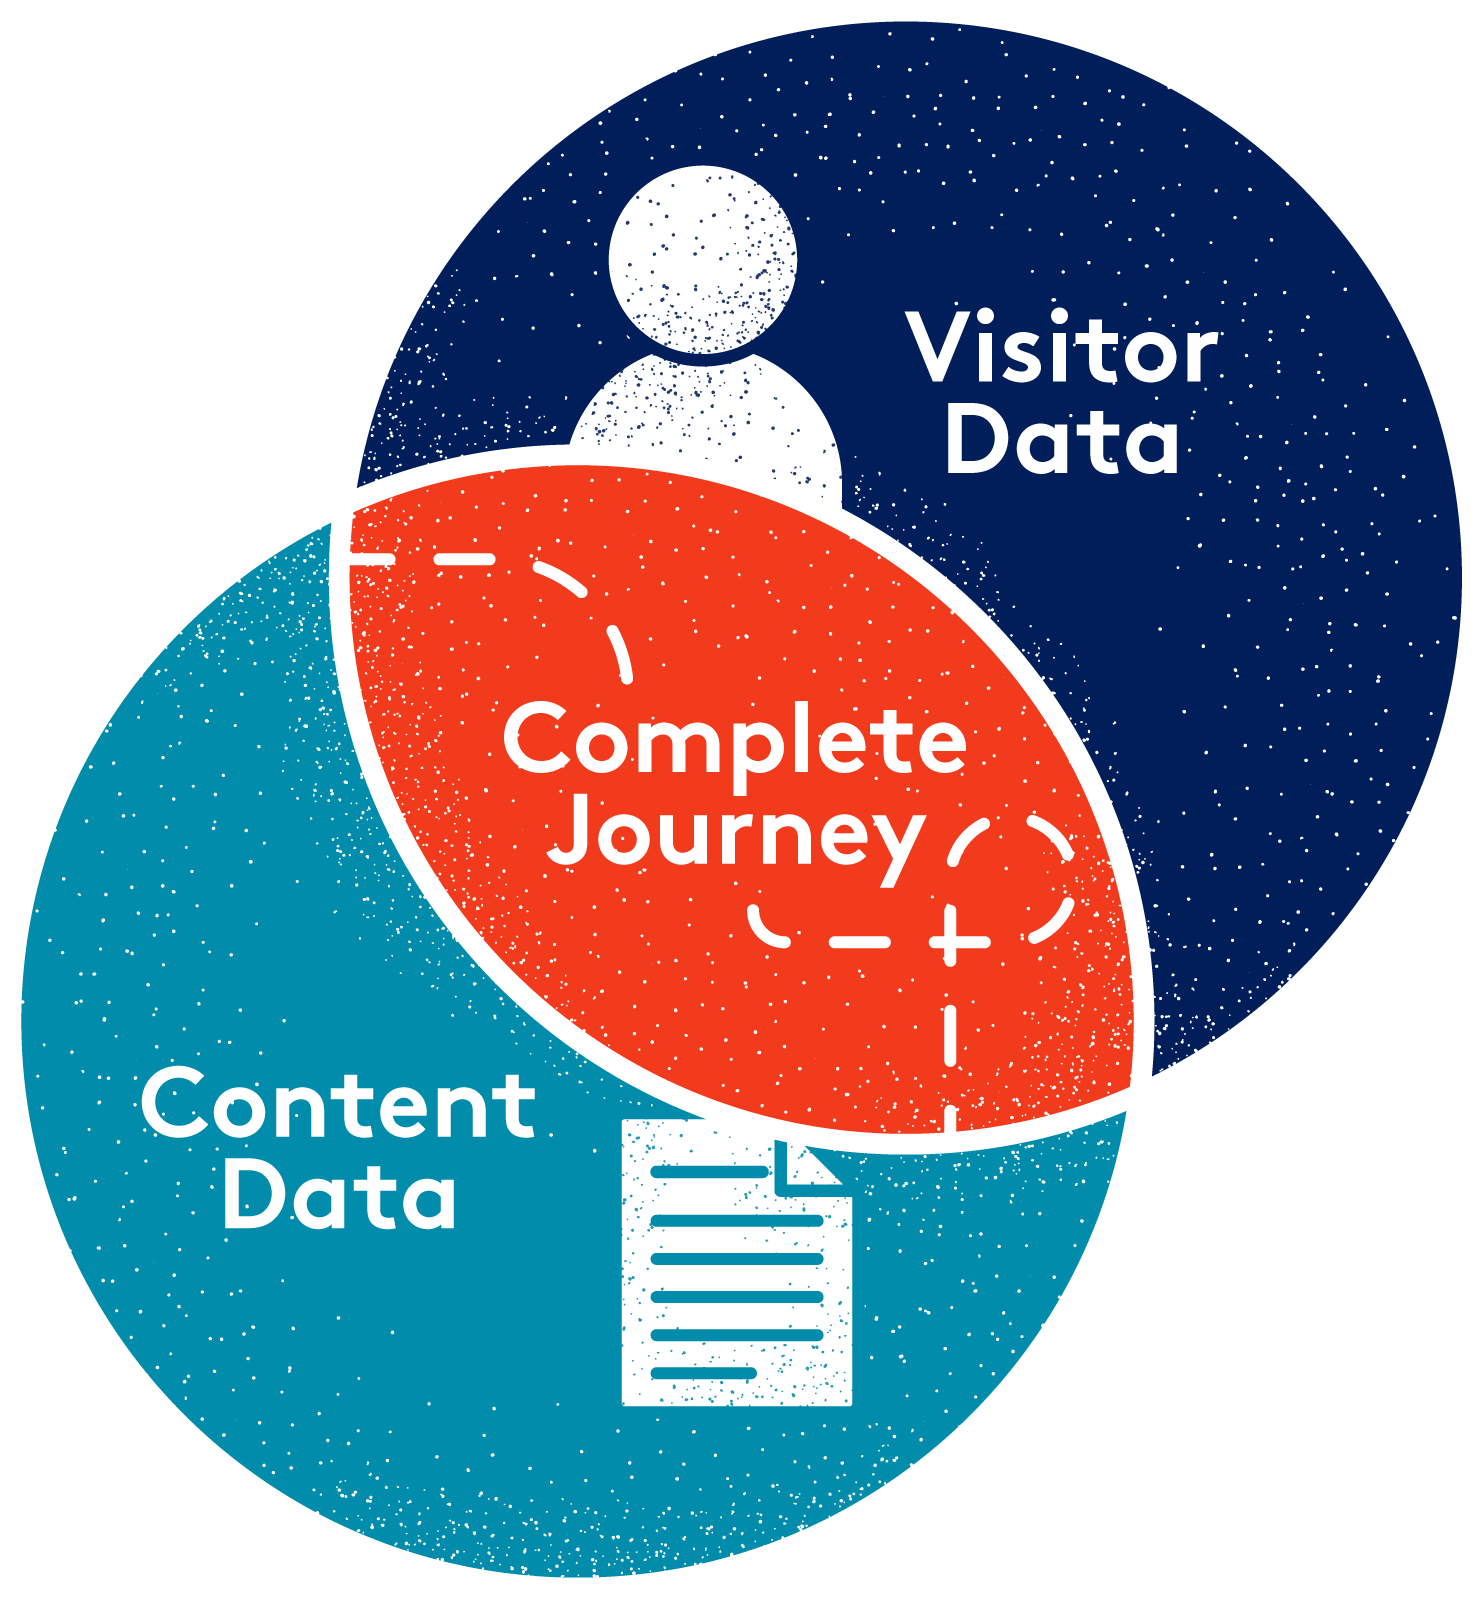 Venn diagram showing visitor data overlapping with content data to reveal the complete content journey